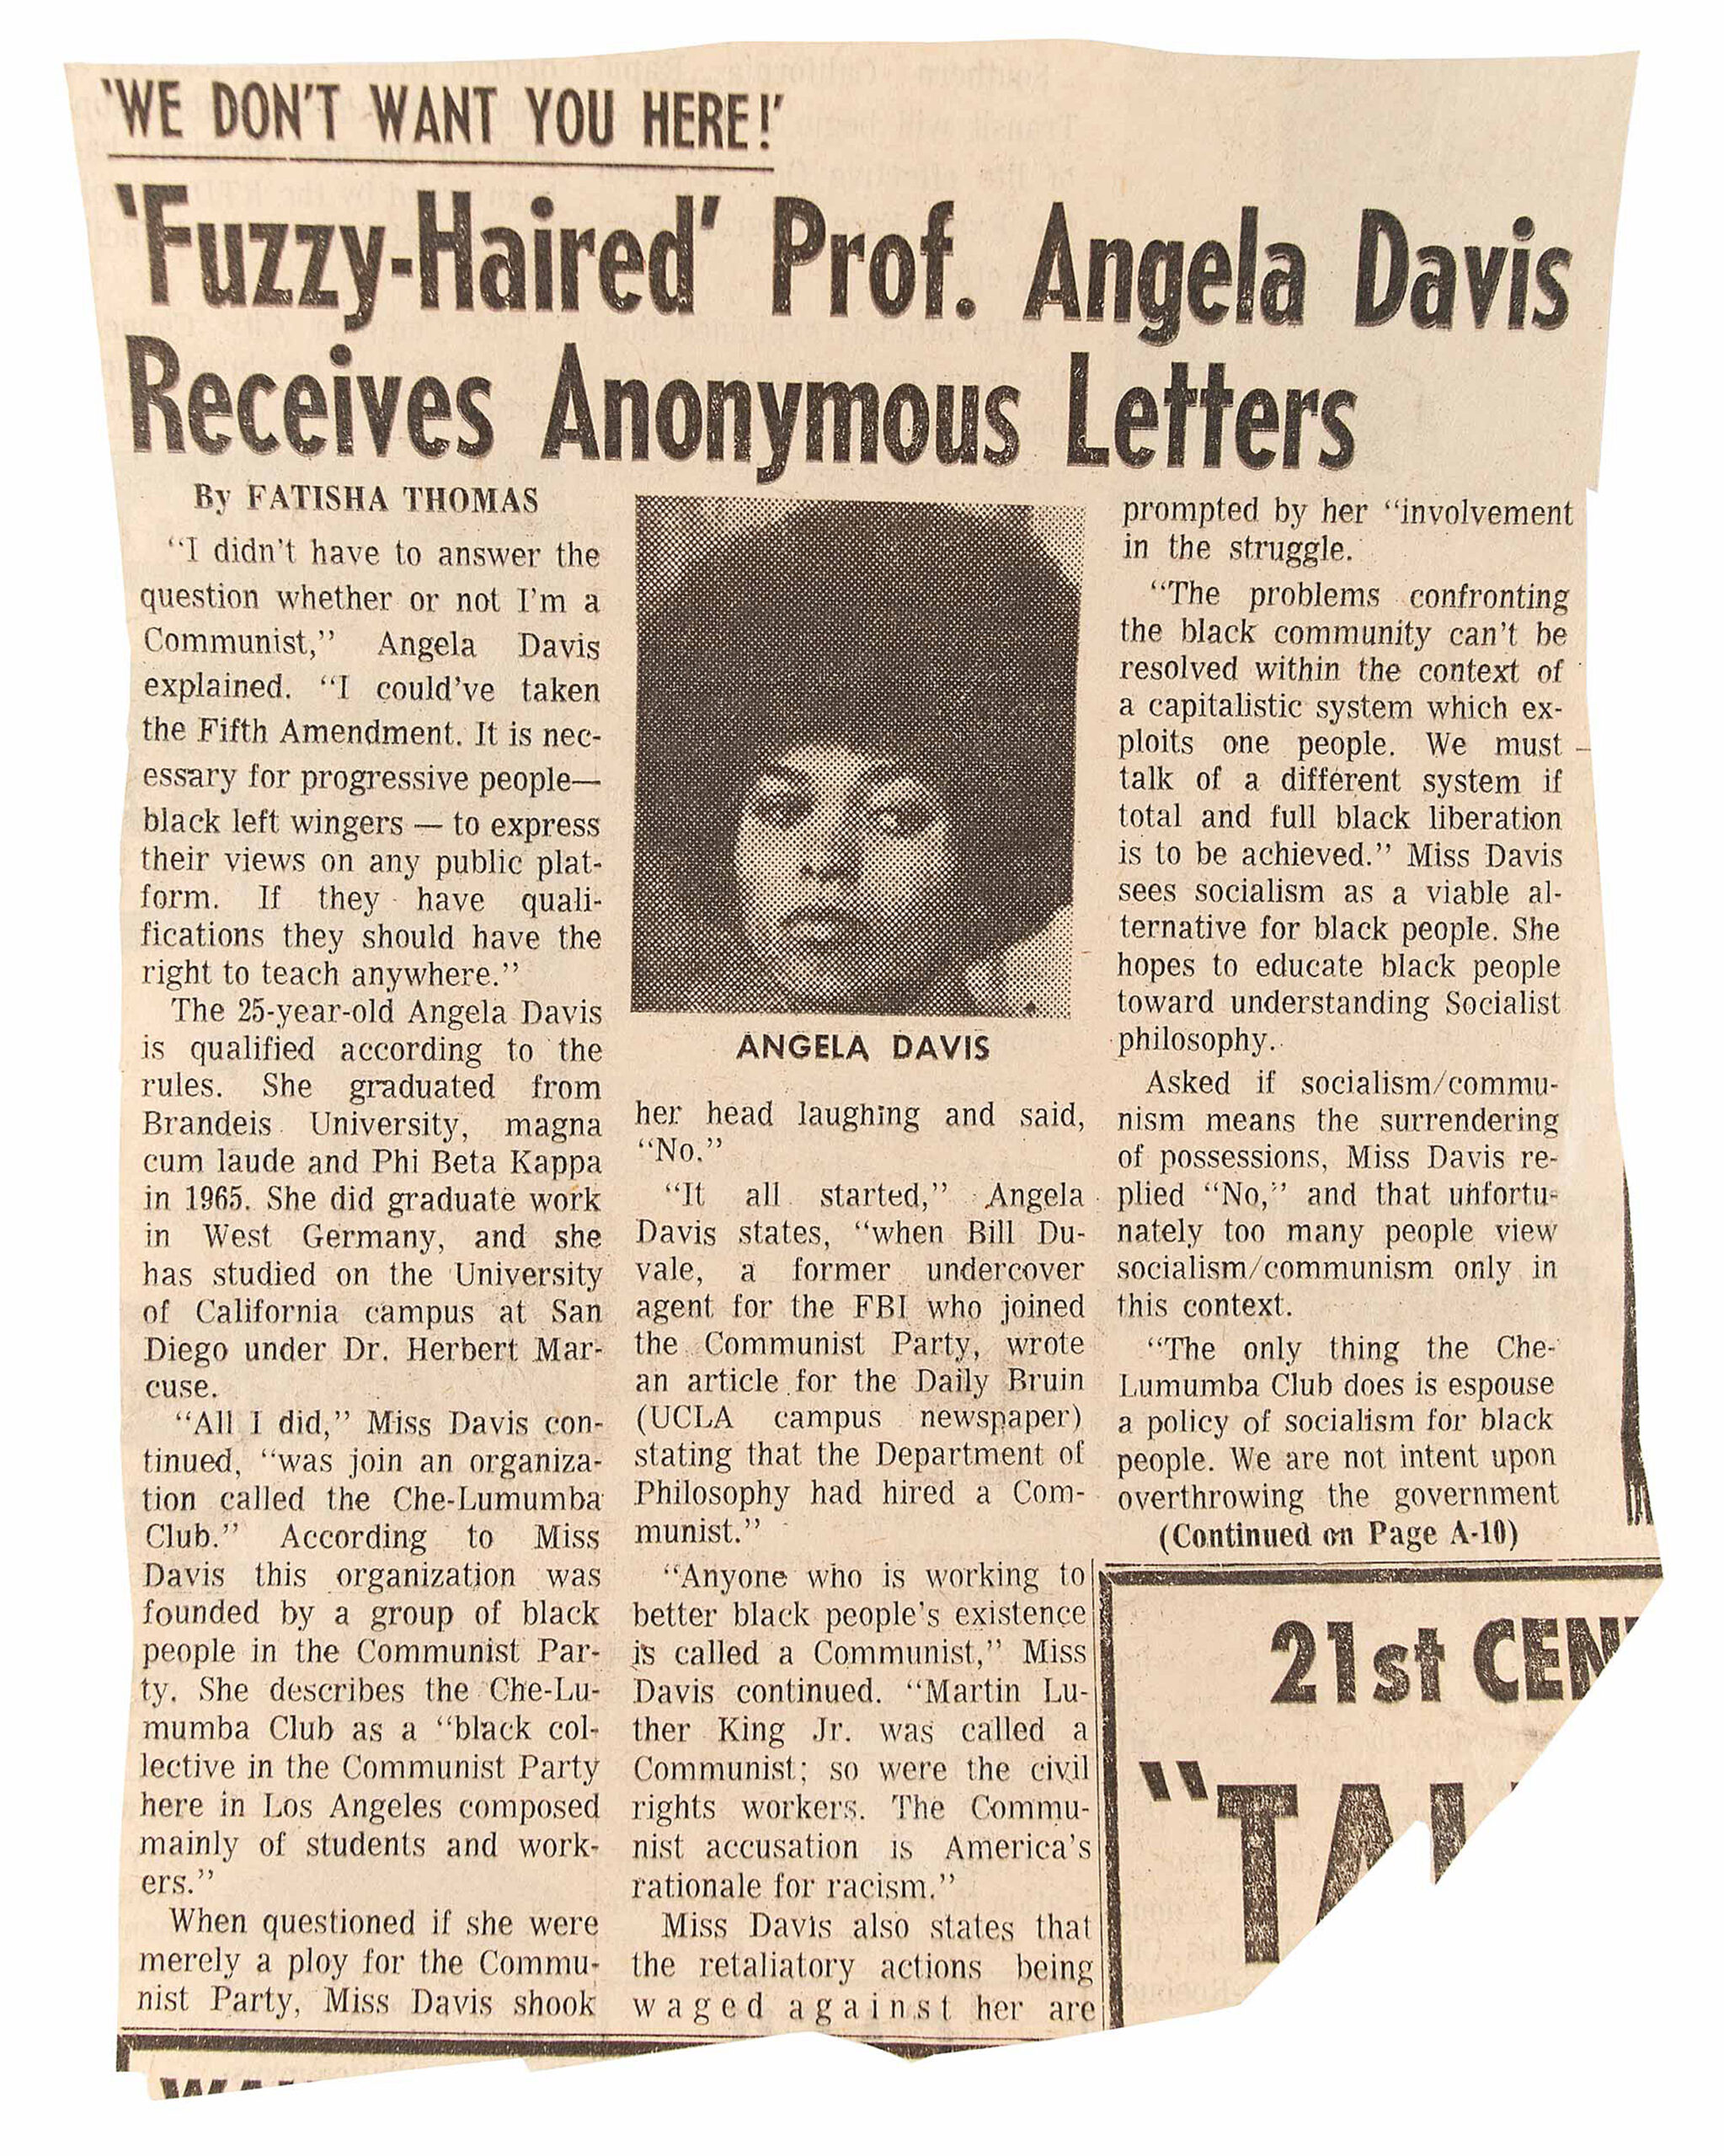 A newspaper clipping of an editorial on Angela Davis